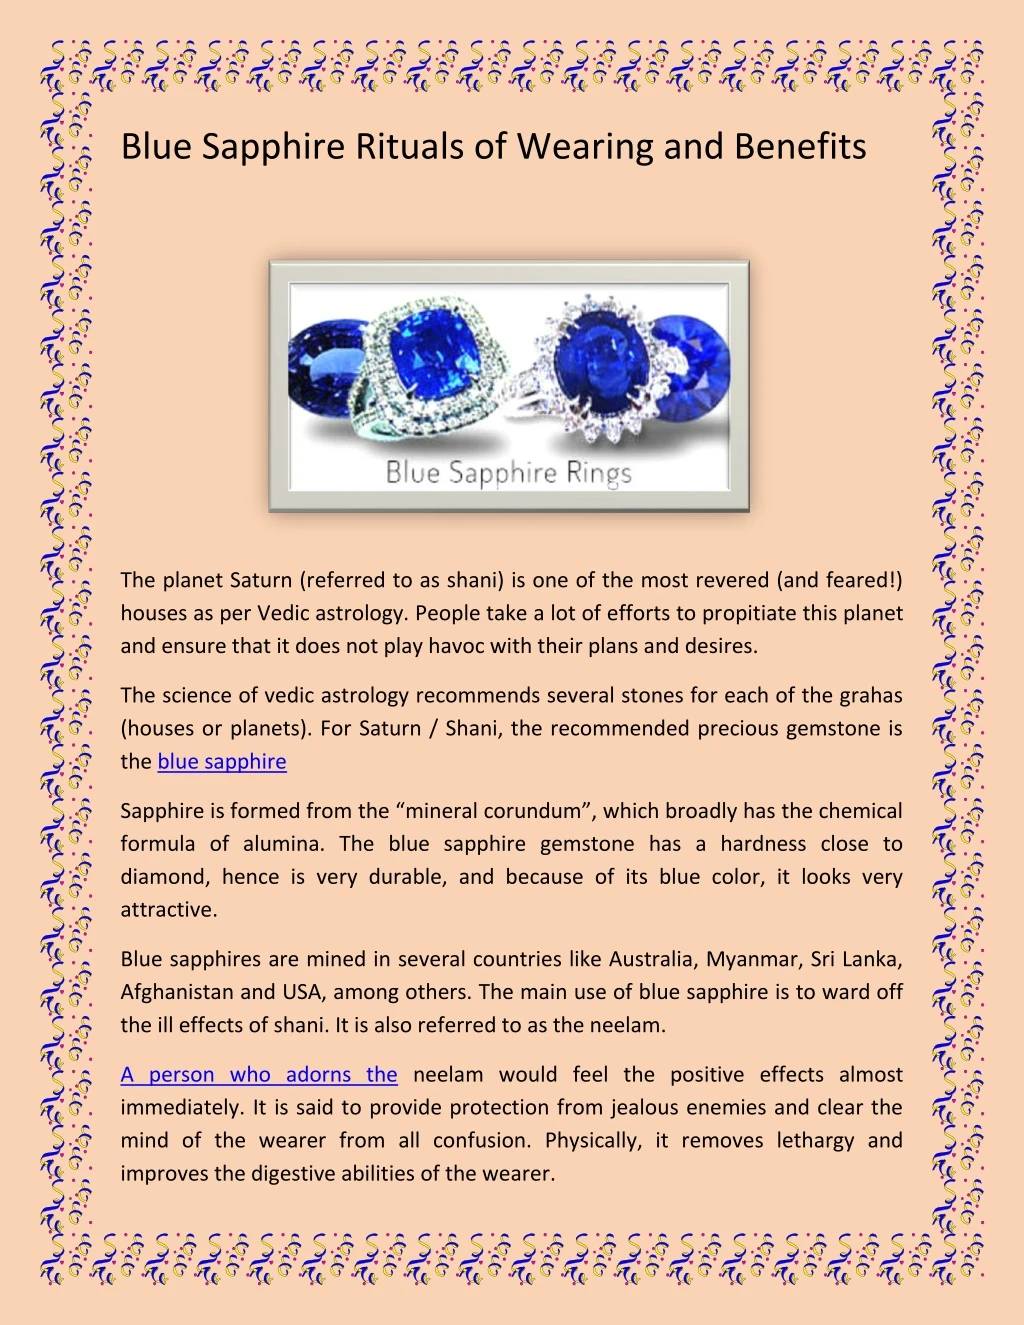 blue sapphire rituals of wearing and benefits